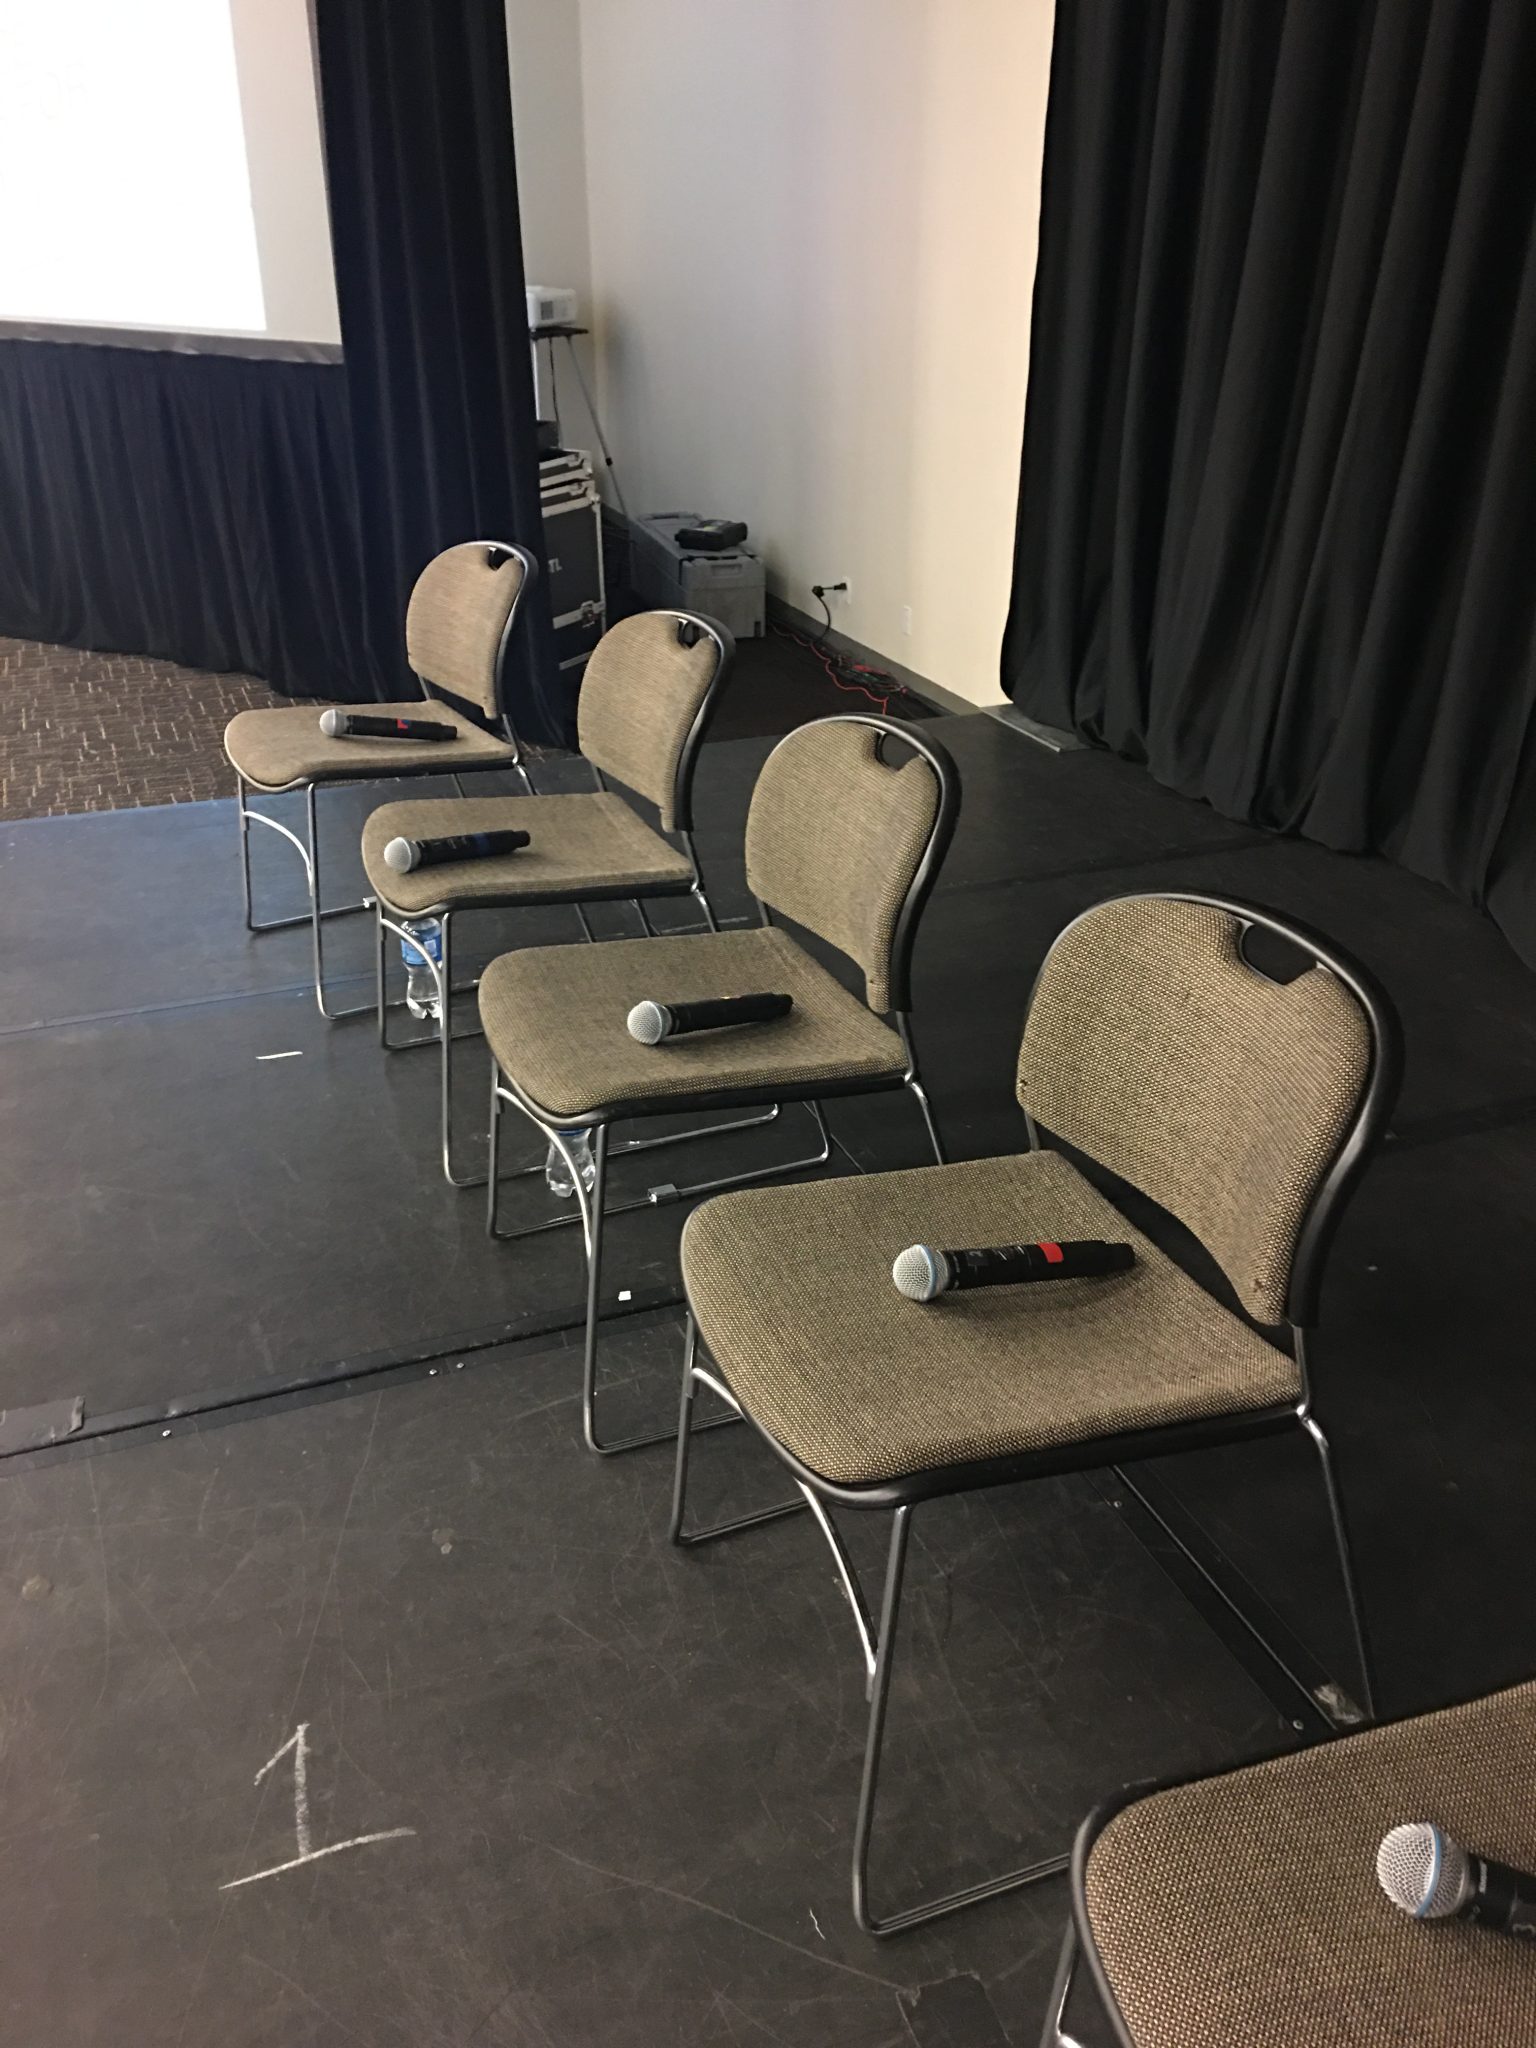 Microphones laid out on chairs, ready for a panel at WordCamp US 2019